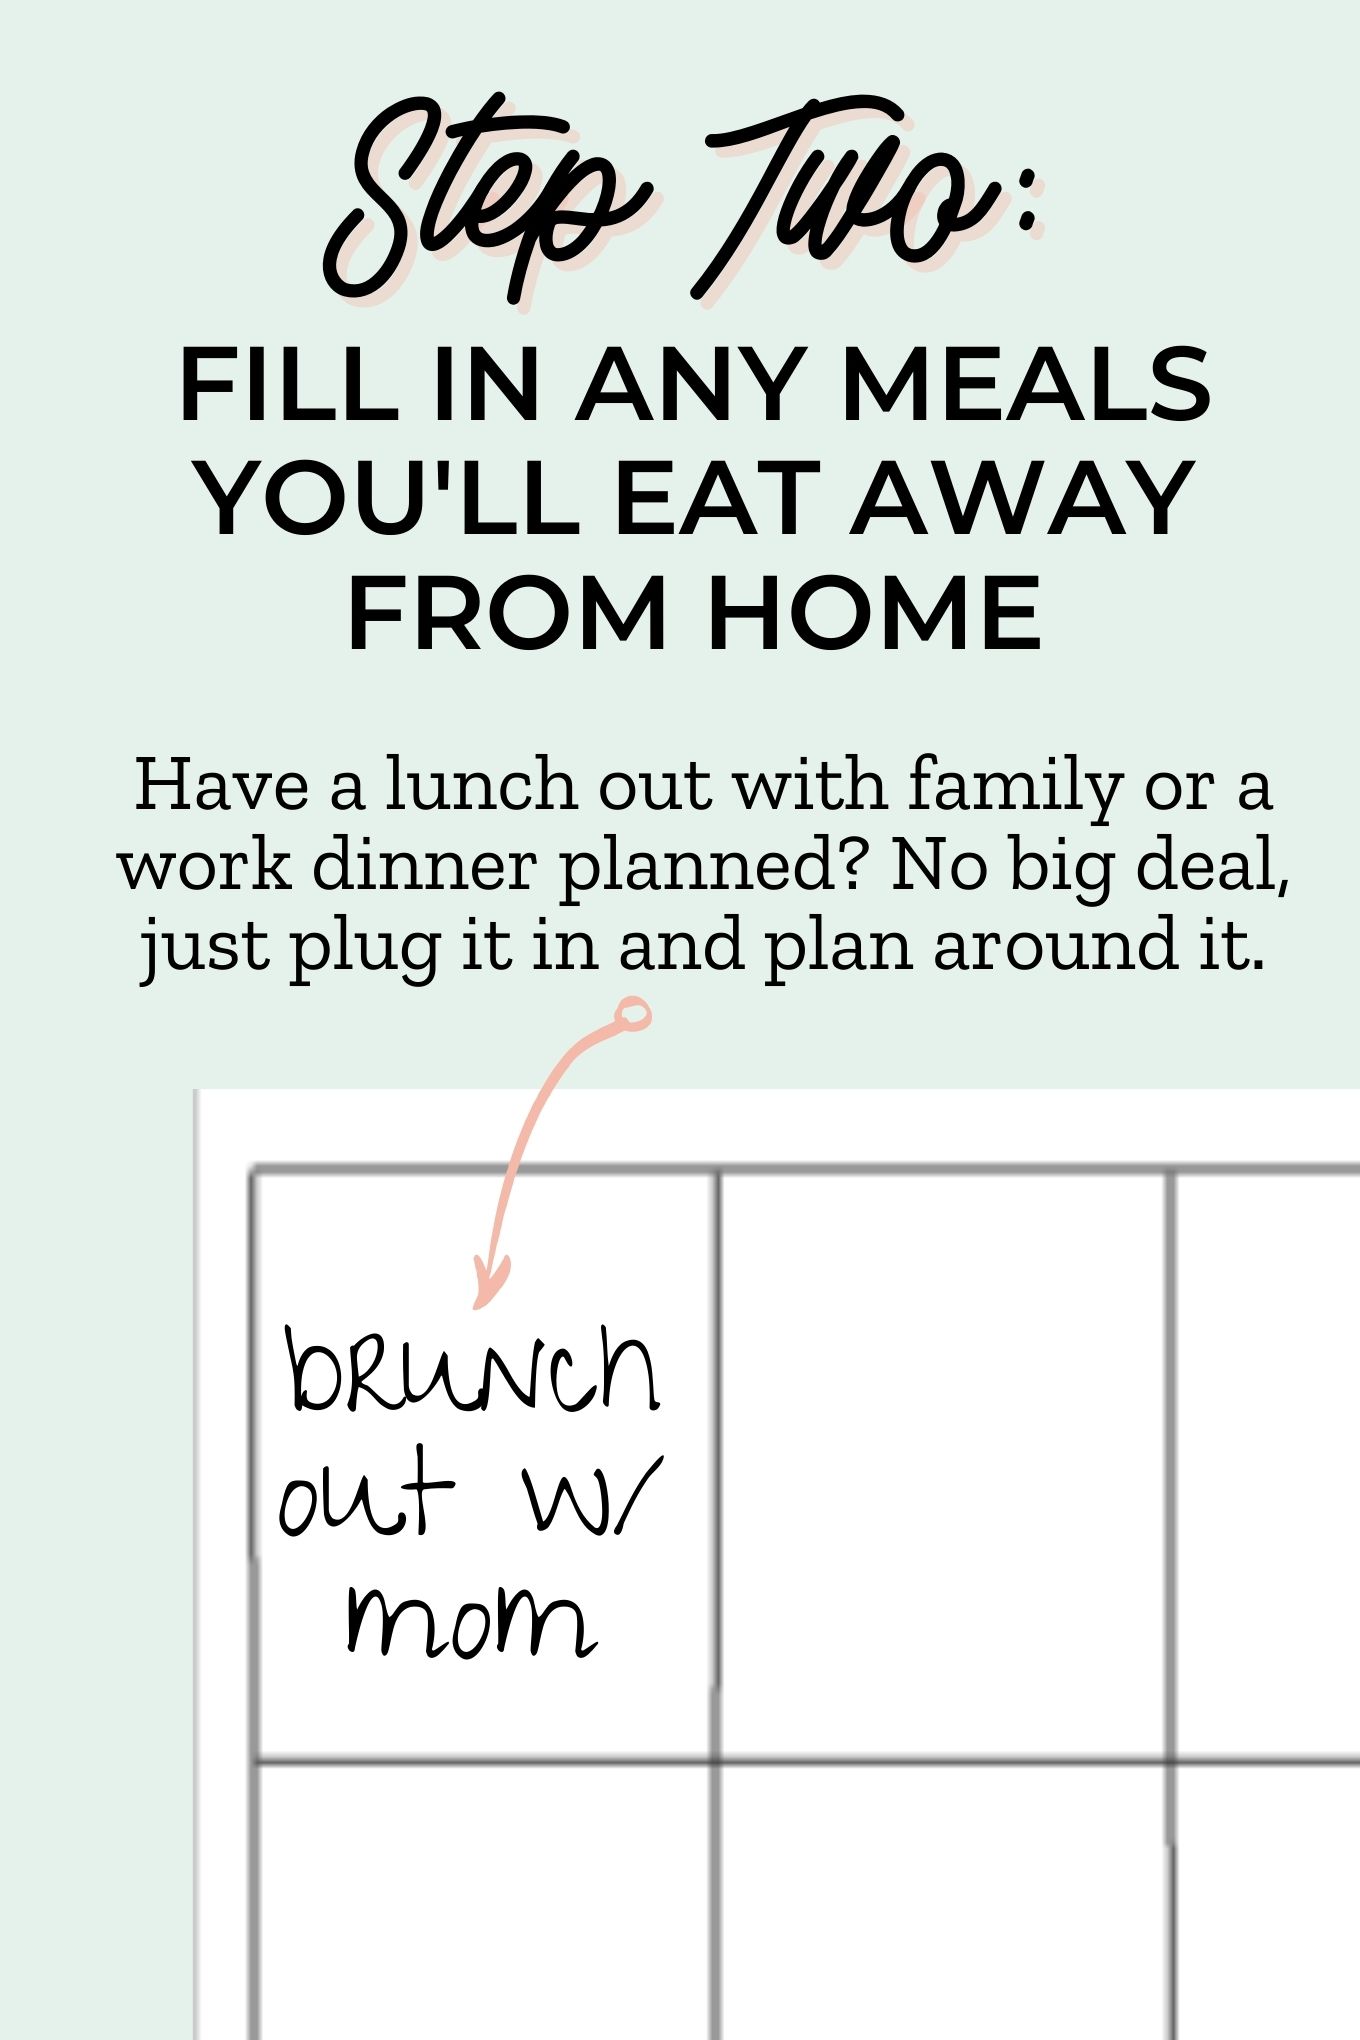 a green graphic with the words "step two: fill in any meals you'll eat away from home" in black writing and a grid weekly meal plan photo